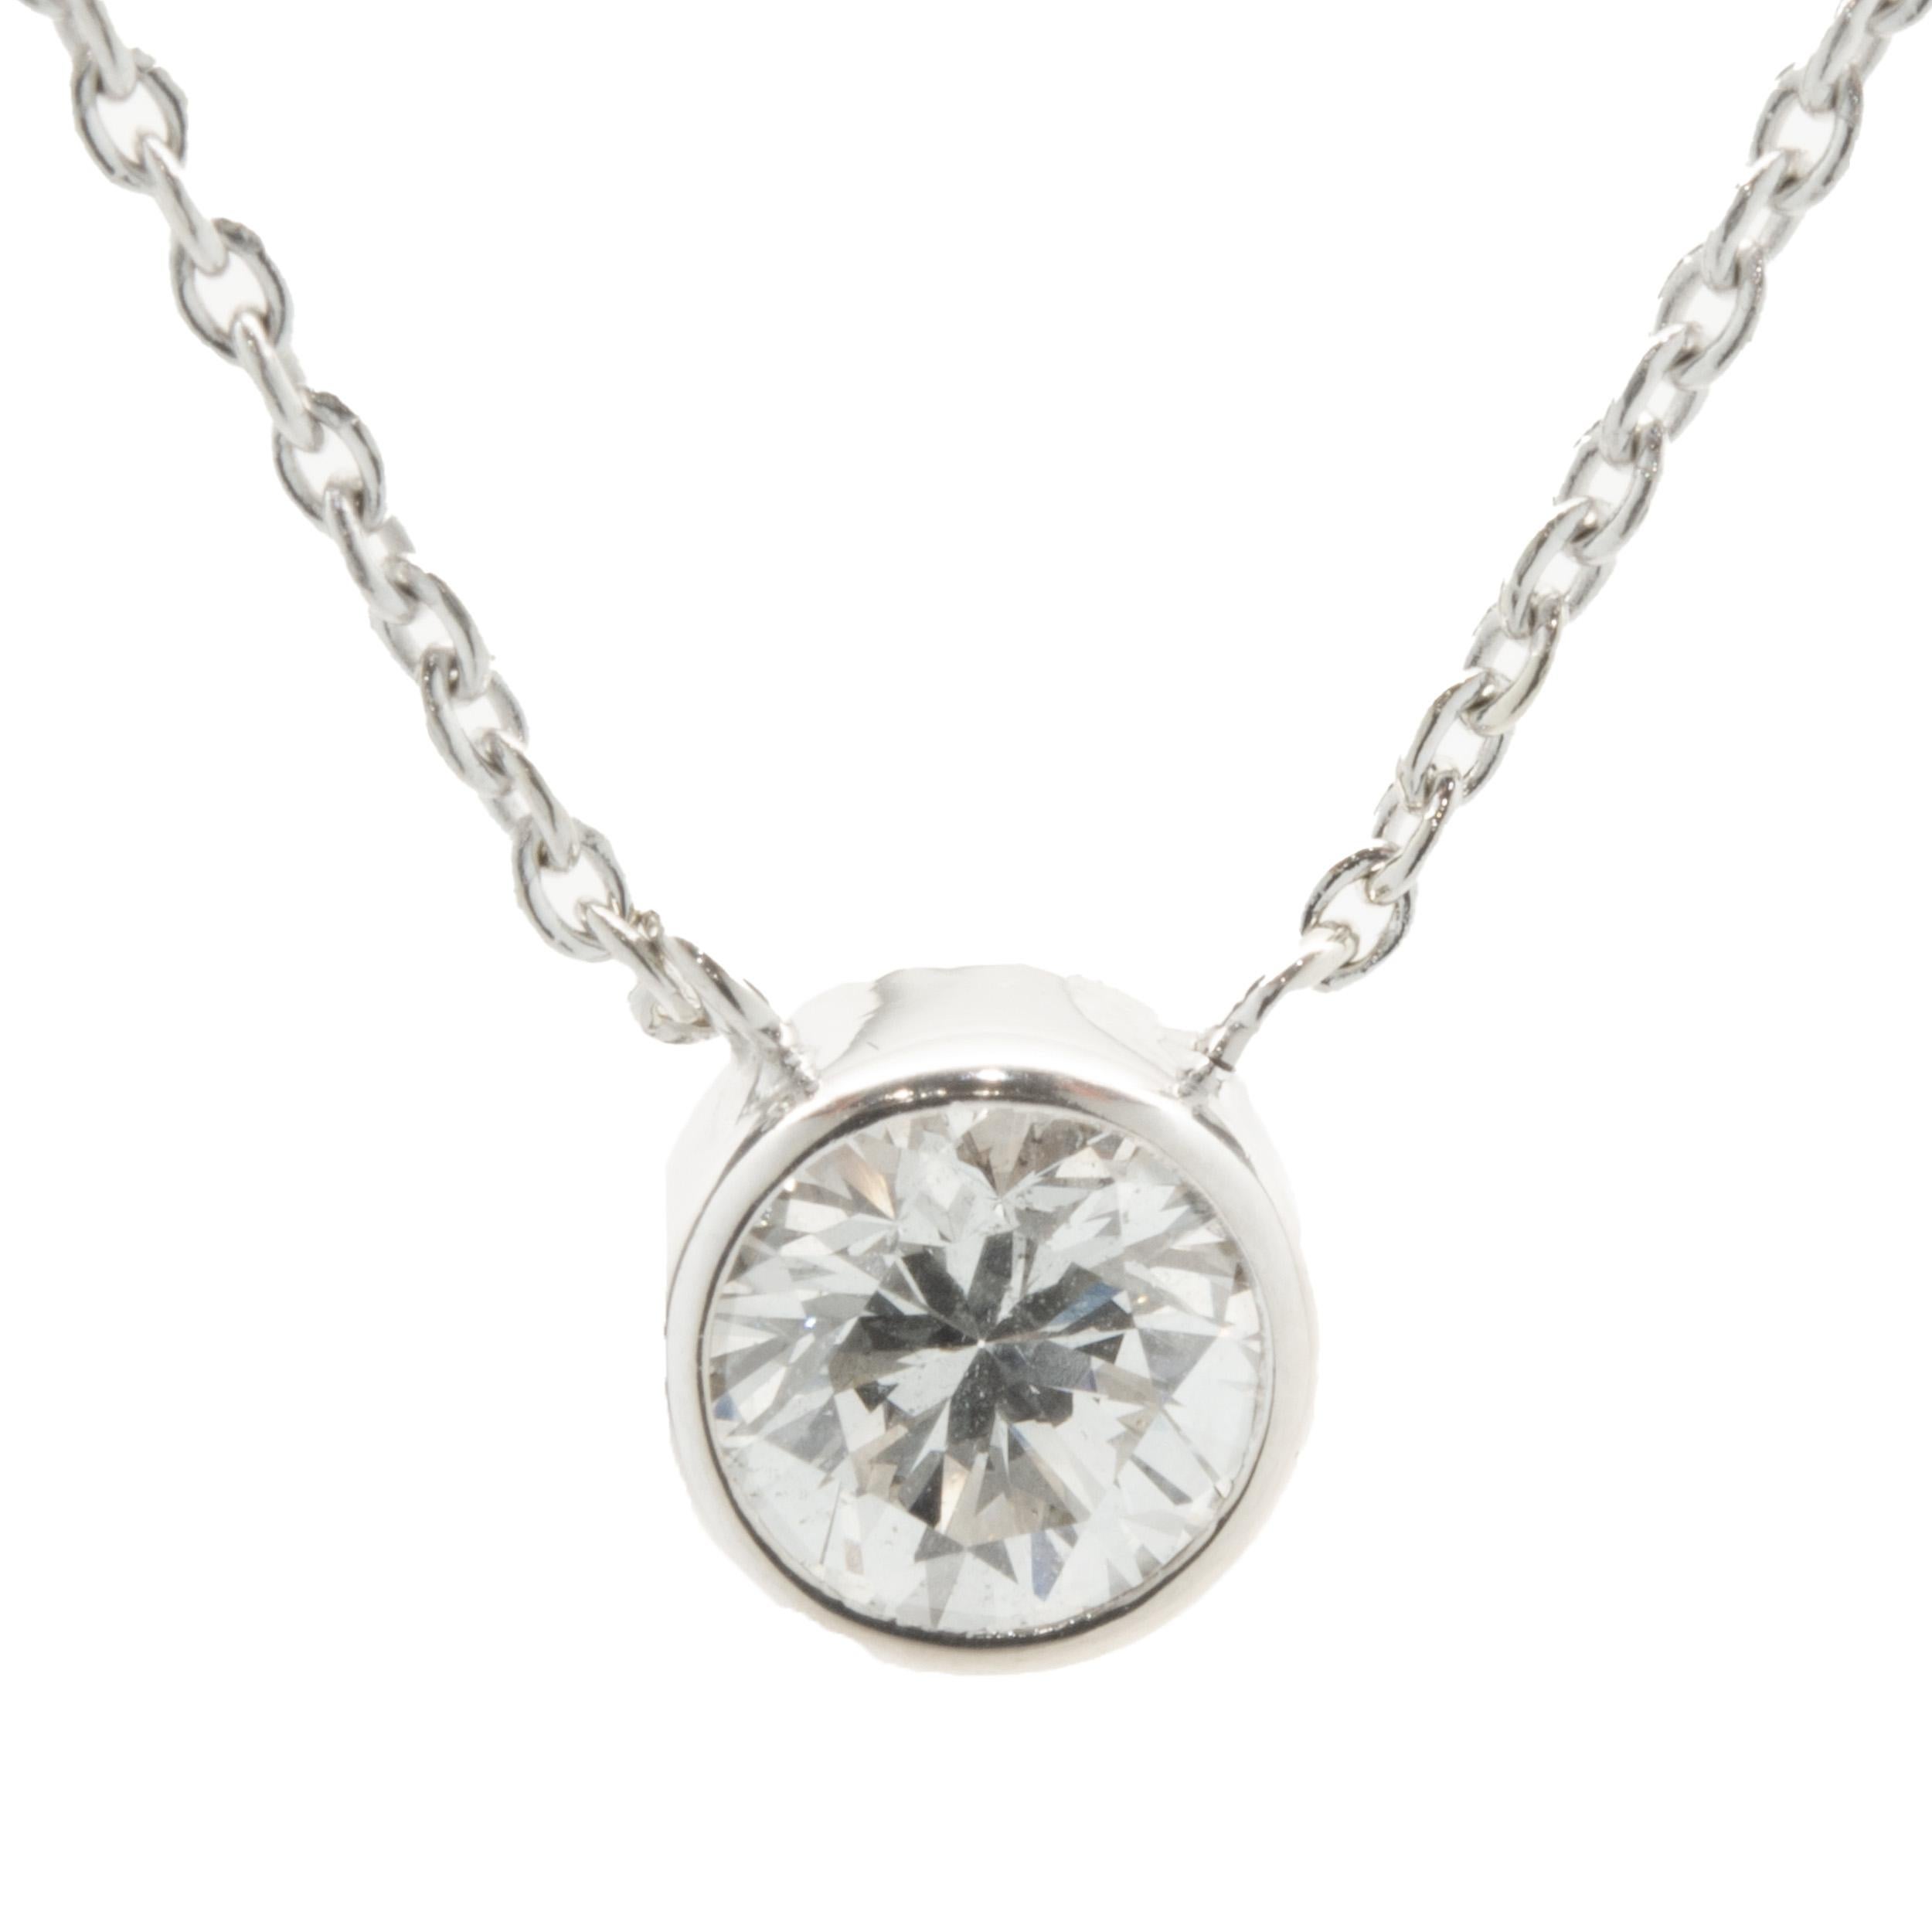 Designer: custom
Material: 14K white gold
Diamonds: 1 round brilliant cut = 1.25ct
Color: G
Clarity: VS2
Dimensions: necklace measures 18.5-inches in length 
Weight: 8.48 grams